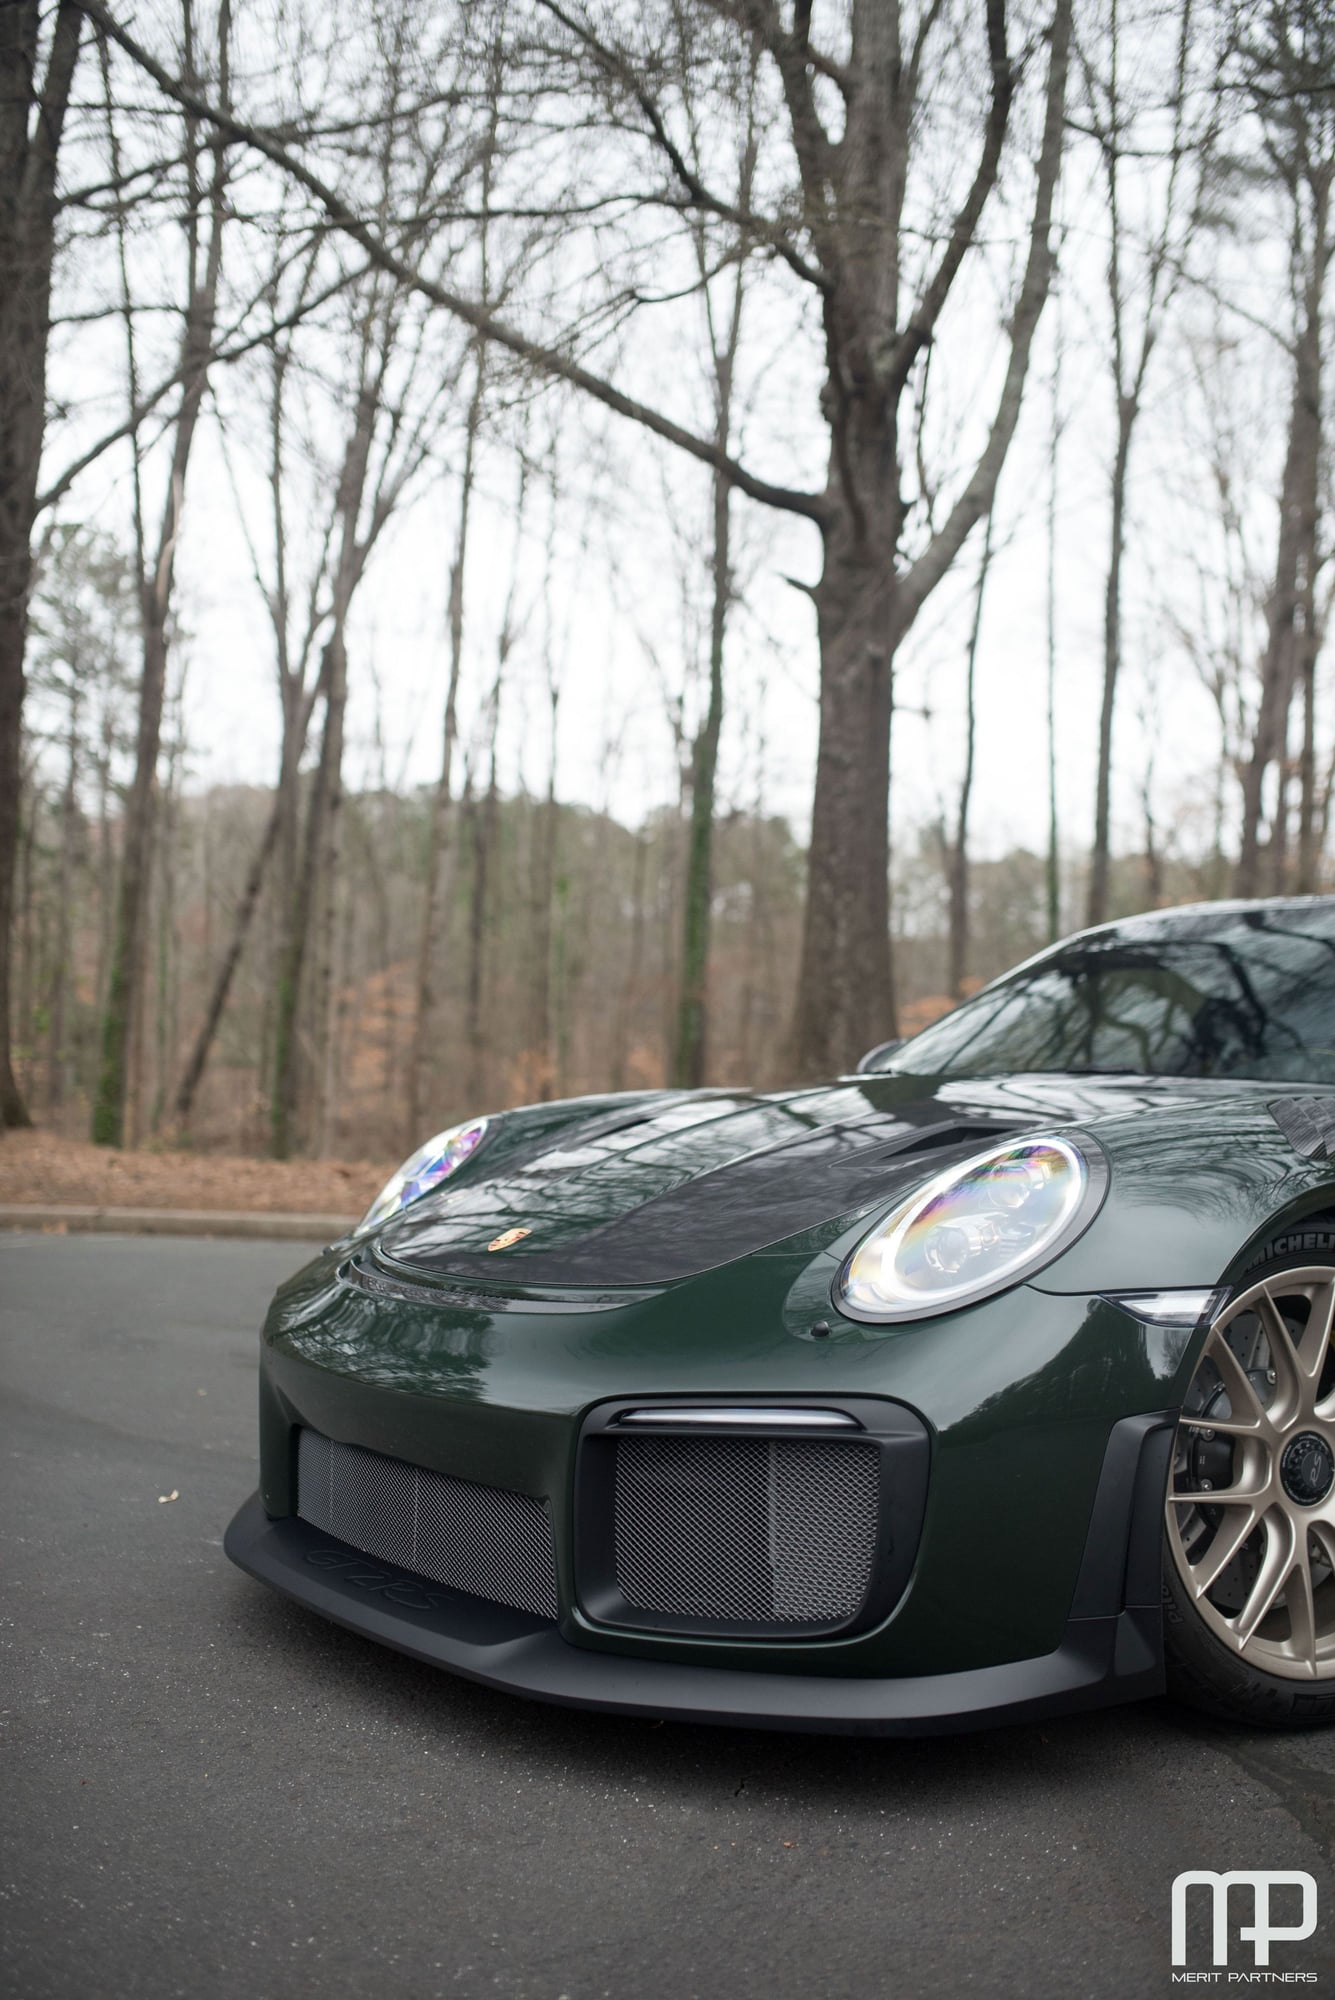 2018 Porsche GT2 - 2018 Porsche GT2RS Paint-to-Sample Brewster Green - Used - VIN WP0AE2A90JS185767 - 1,500 Miles - 6 cyl - 2WD - Automatic - Coupe - Other - Atlanta, GA 30360, United States